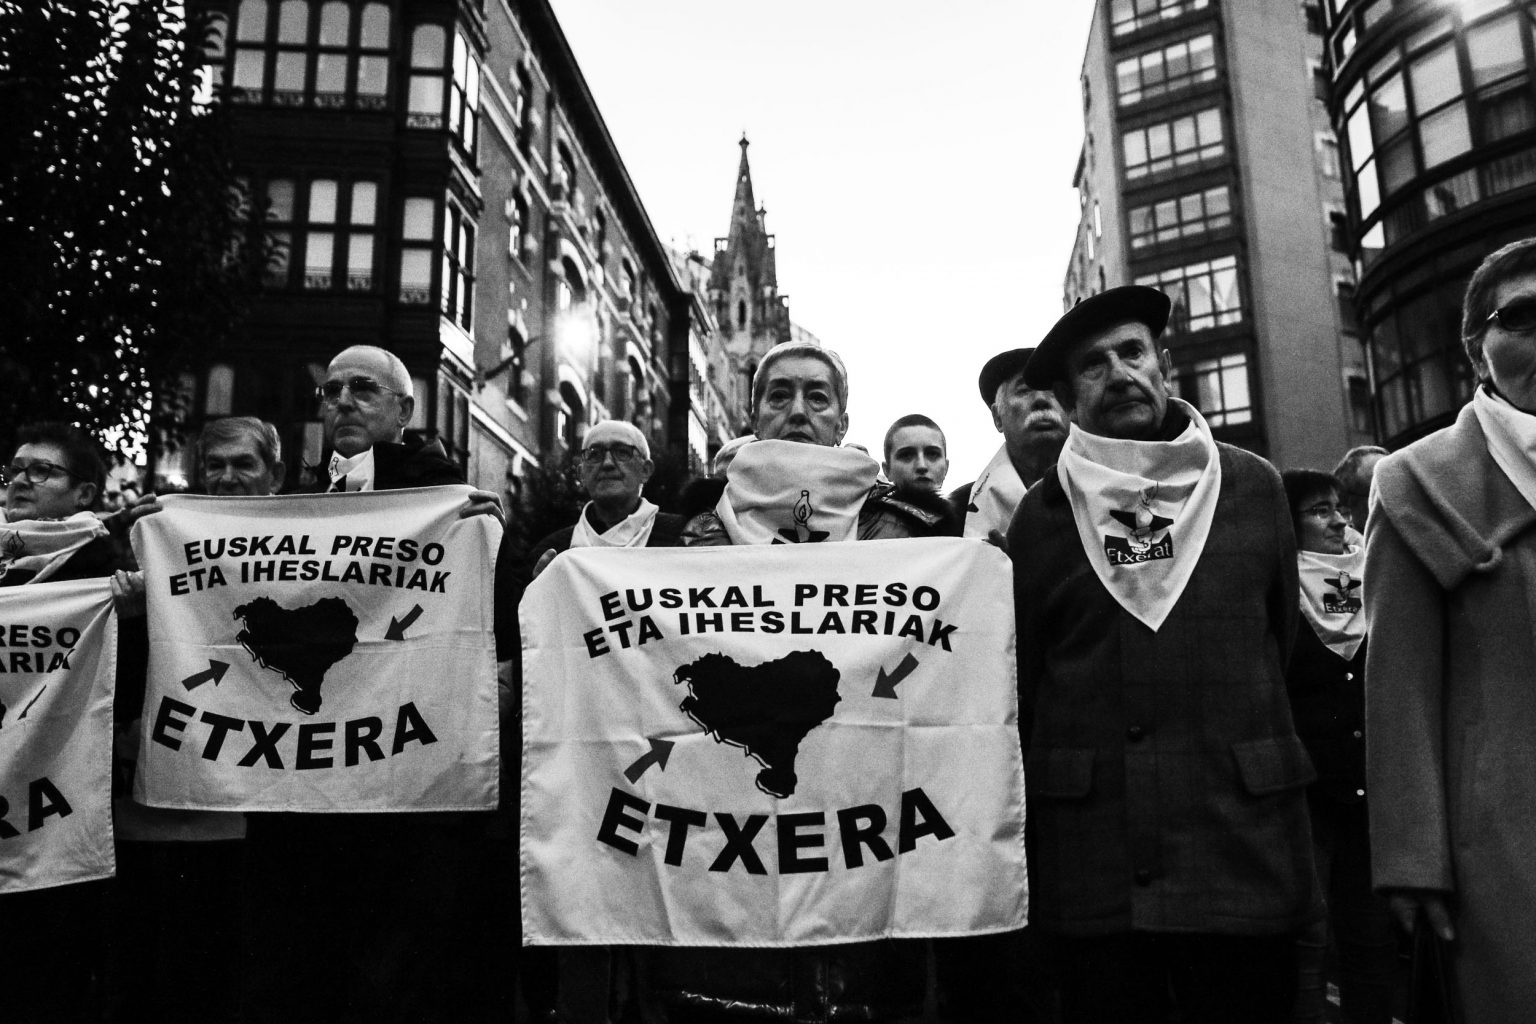 As every year, tens of thousands of people demonstrated peacefully in Bilbao in the late afternoon in favour of bringing the etarras prisoners imprisoned away from their families. Bilbao on 11 January 2019. Comme chaque annee, des dizaines de milliers de personnes ont manifeste dans le calme a Bilbao en fin d apres midi en faveur d un rapprochement des prisonniers etarras emprisonnes loin de leur famille. Bilbao le 11 Janvier 2019.